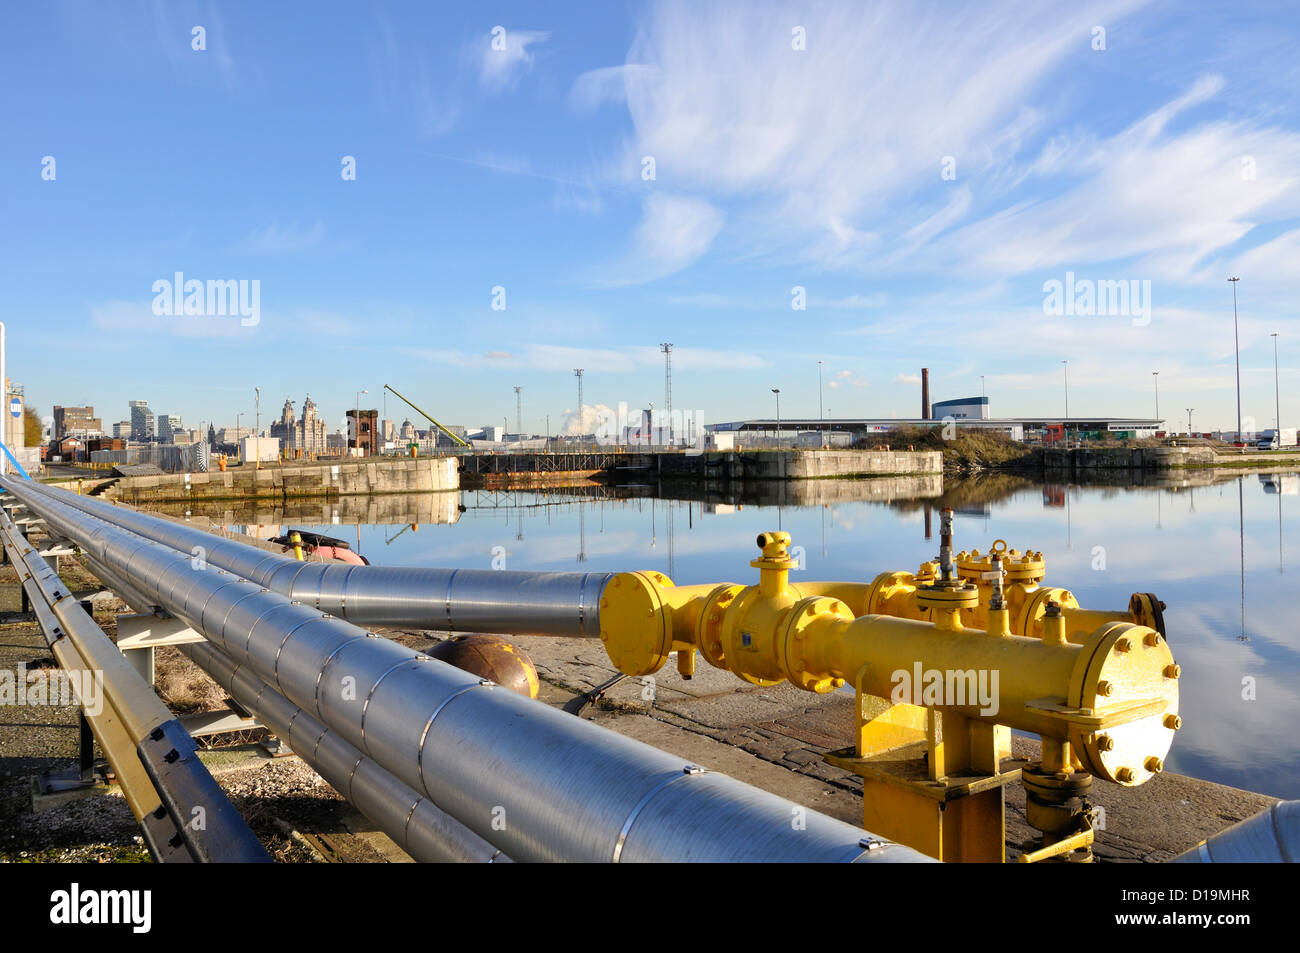 A silver pipeline runs alongside the quay at Wallasey. The Liverpool skyline is in the distance and the Liver Birds building Stock Photo